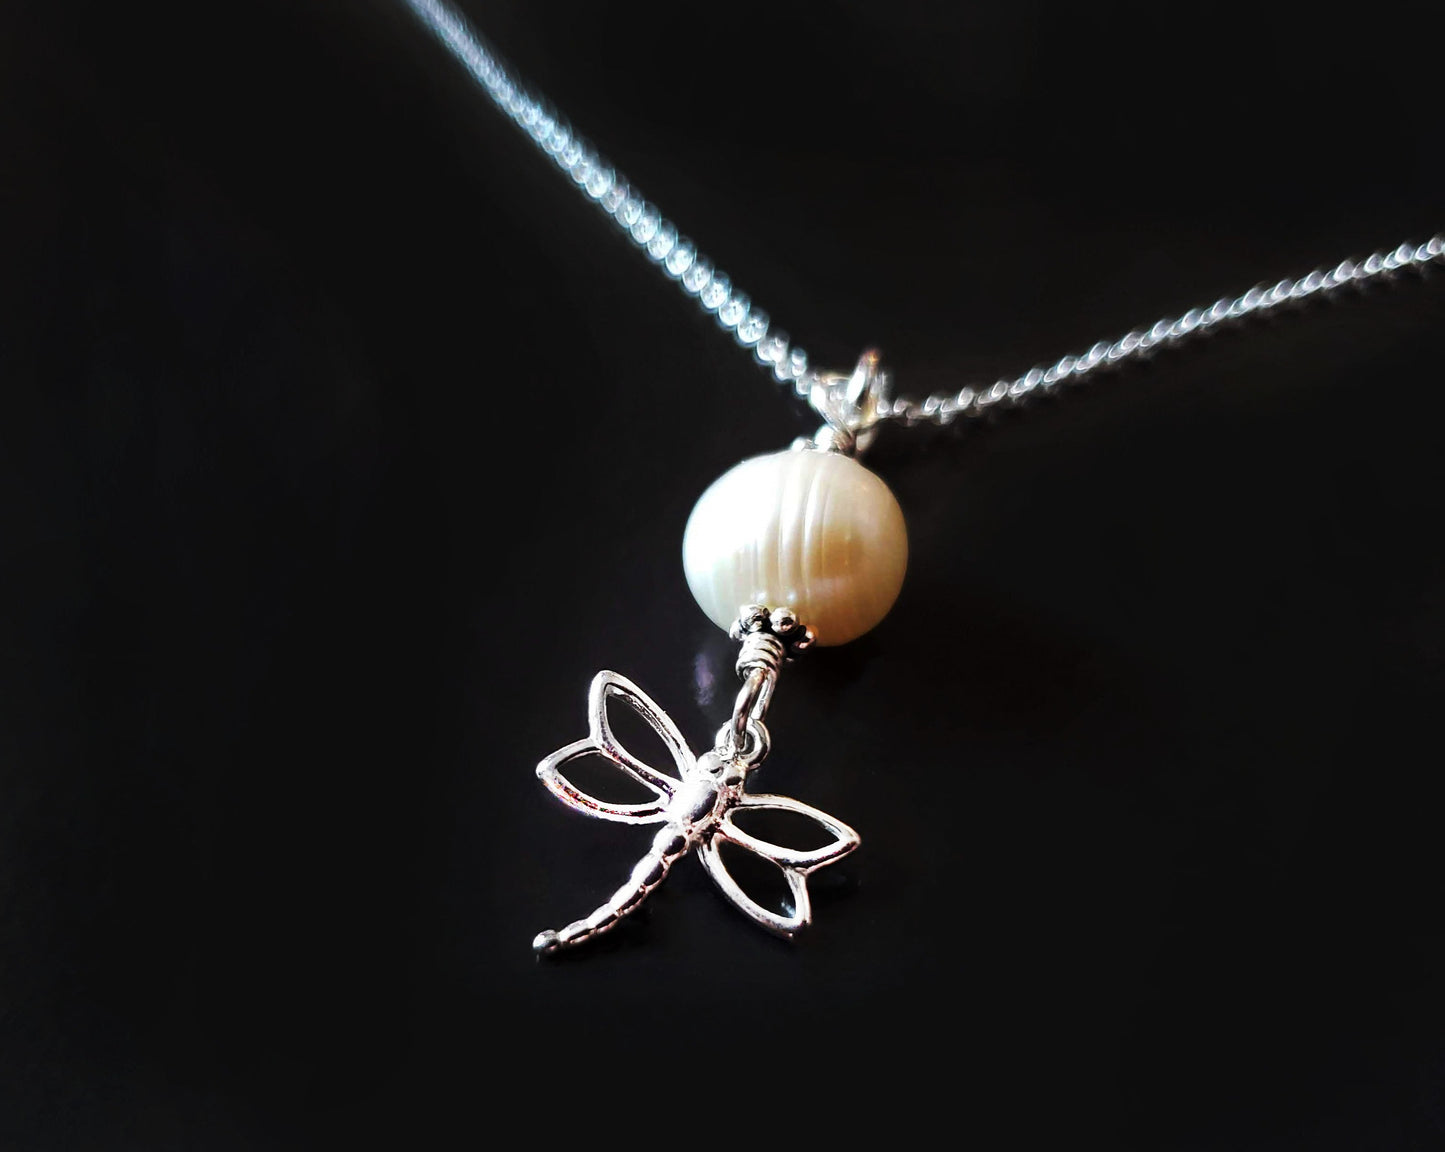 Minimalist Dragonfly Pearl pendant necklace made with all 925 Sterling silver and a large Genuine Freshwater Pearl. 